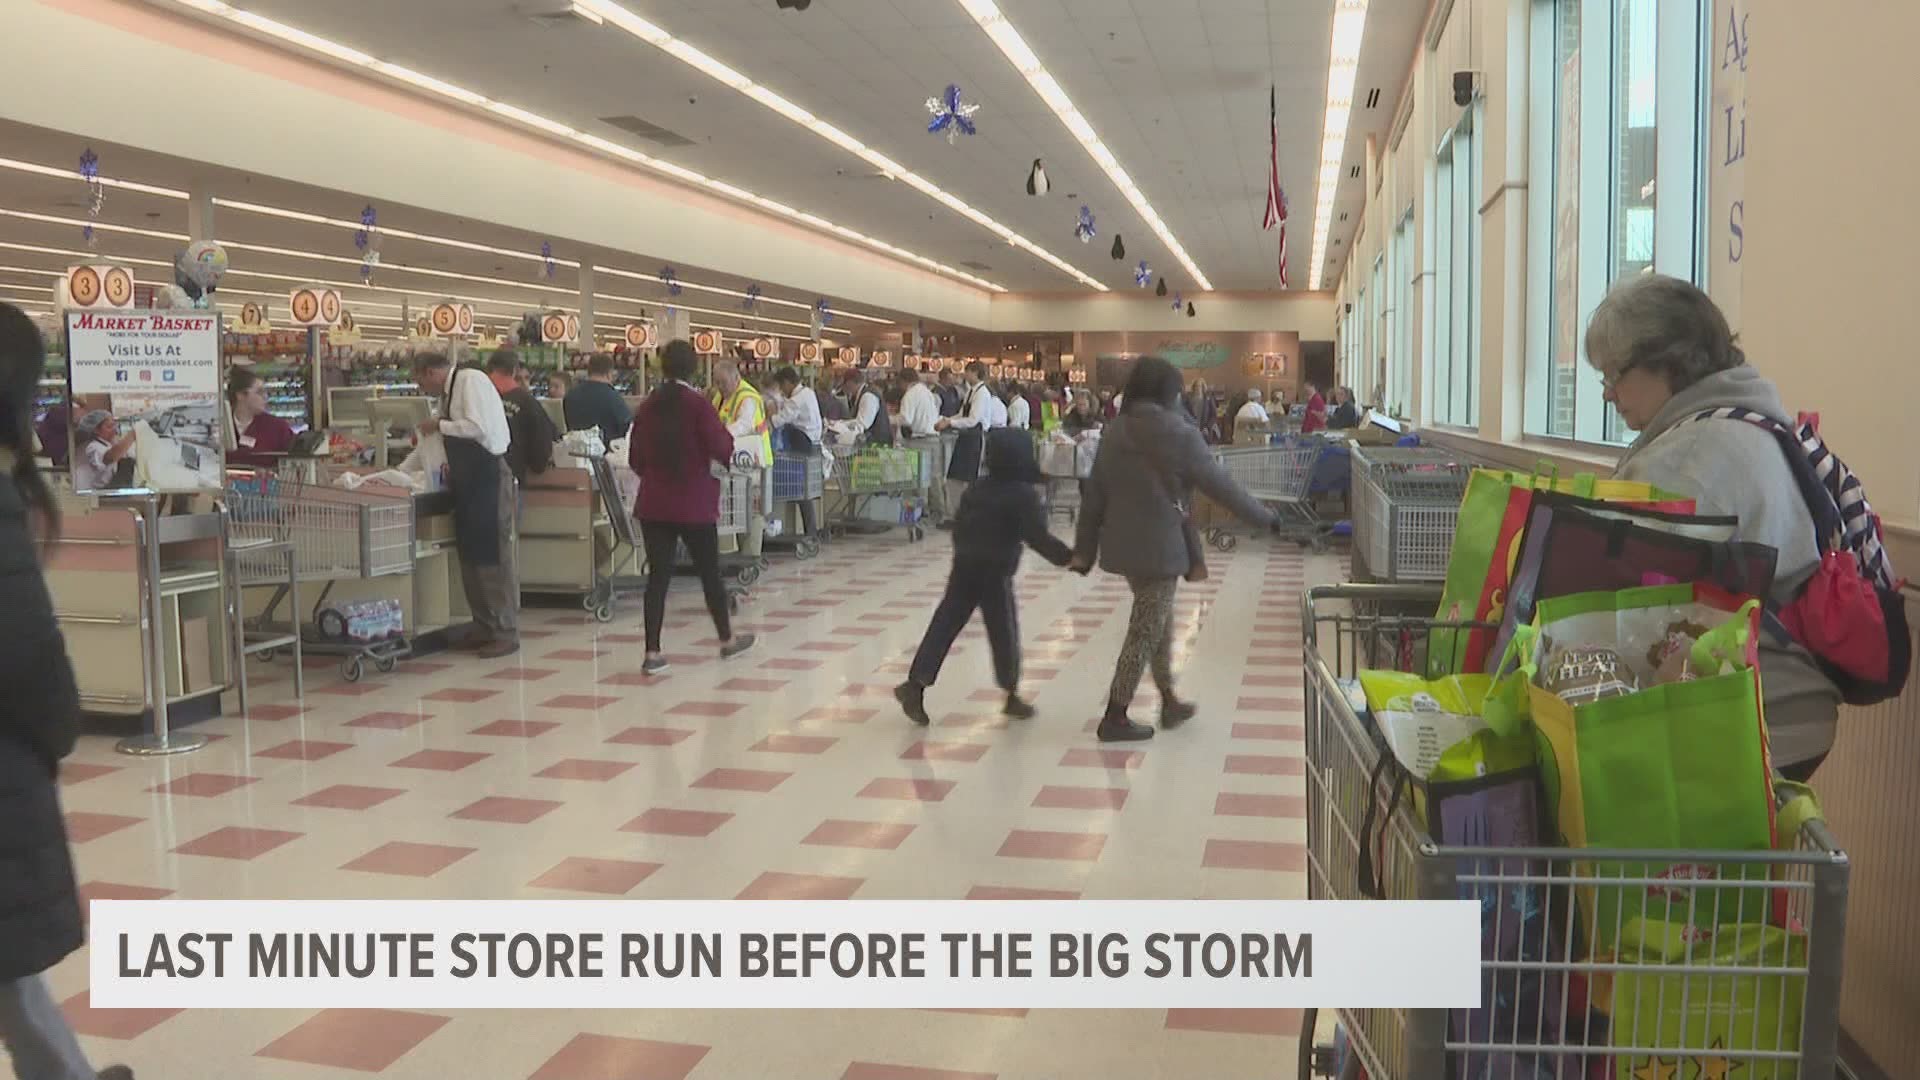 Mainers do some last minute shopping before wicked storm.